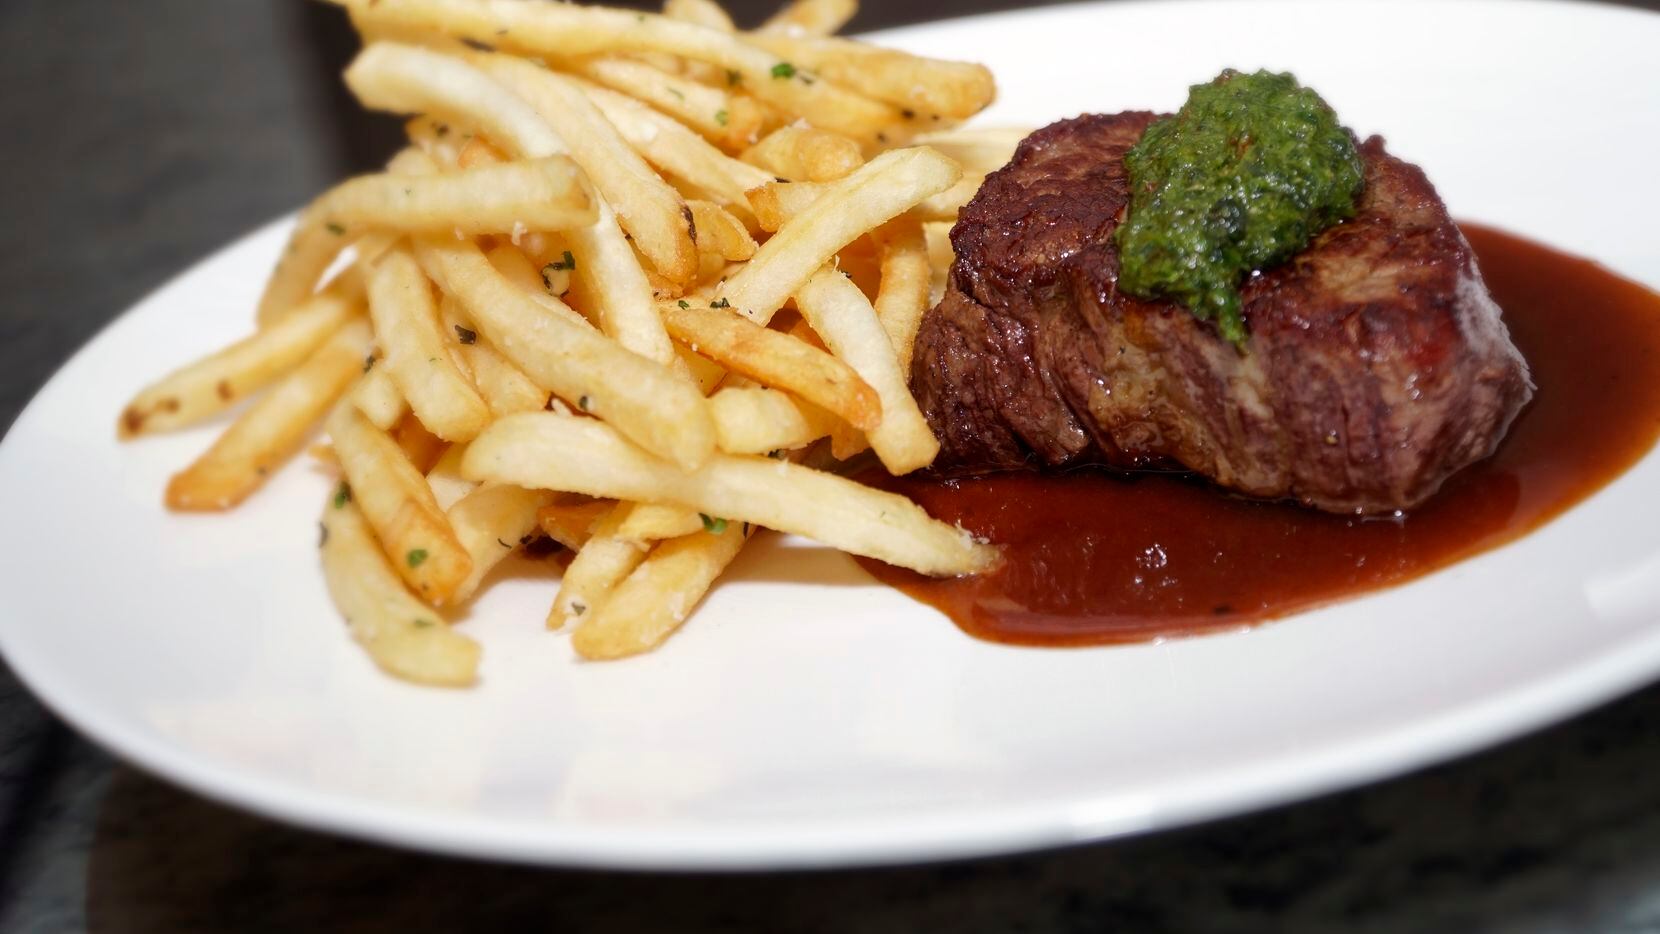 Steak frites are a popular lunch order at Wicked Butcher in the Sinclair Hotel in downtown...